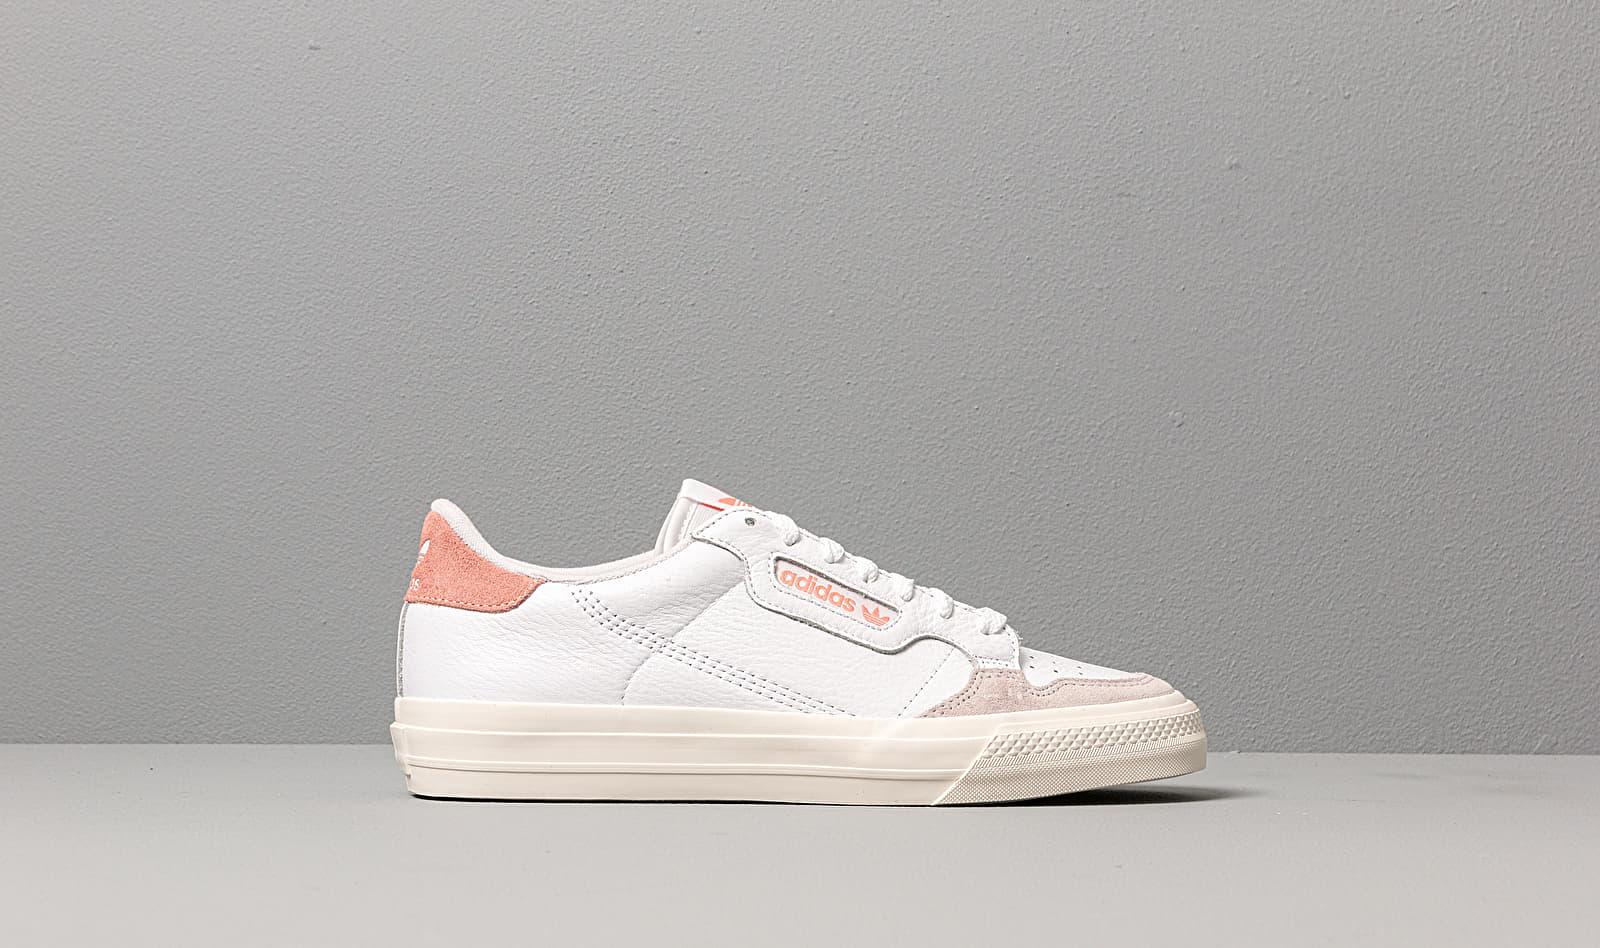 Adidas Continental Vulc Ftw White/ Ftw White/ Glow Pink